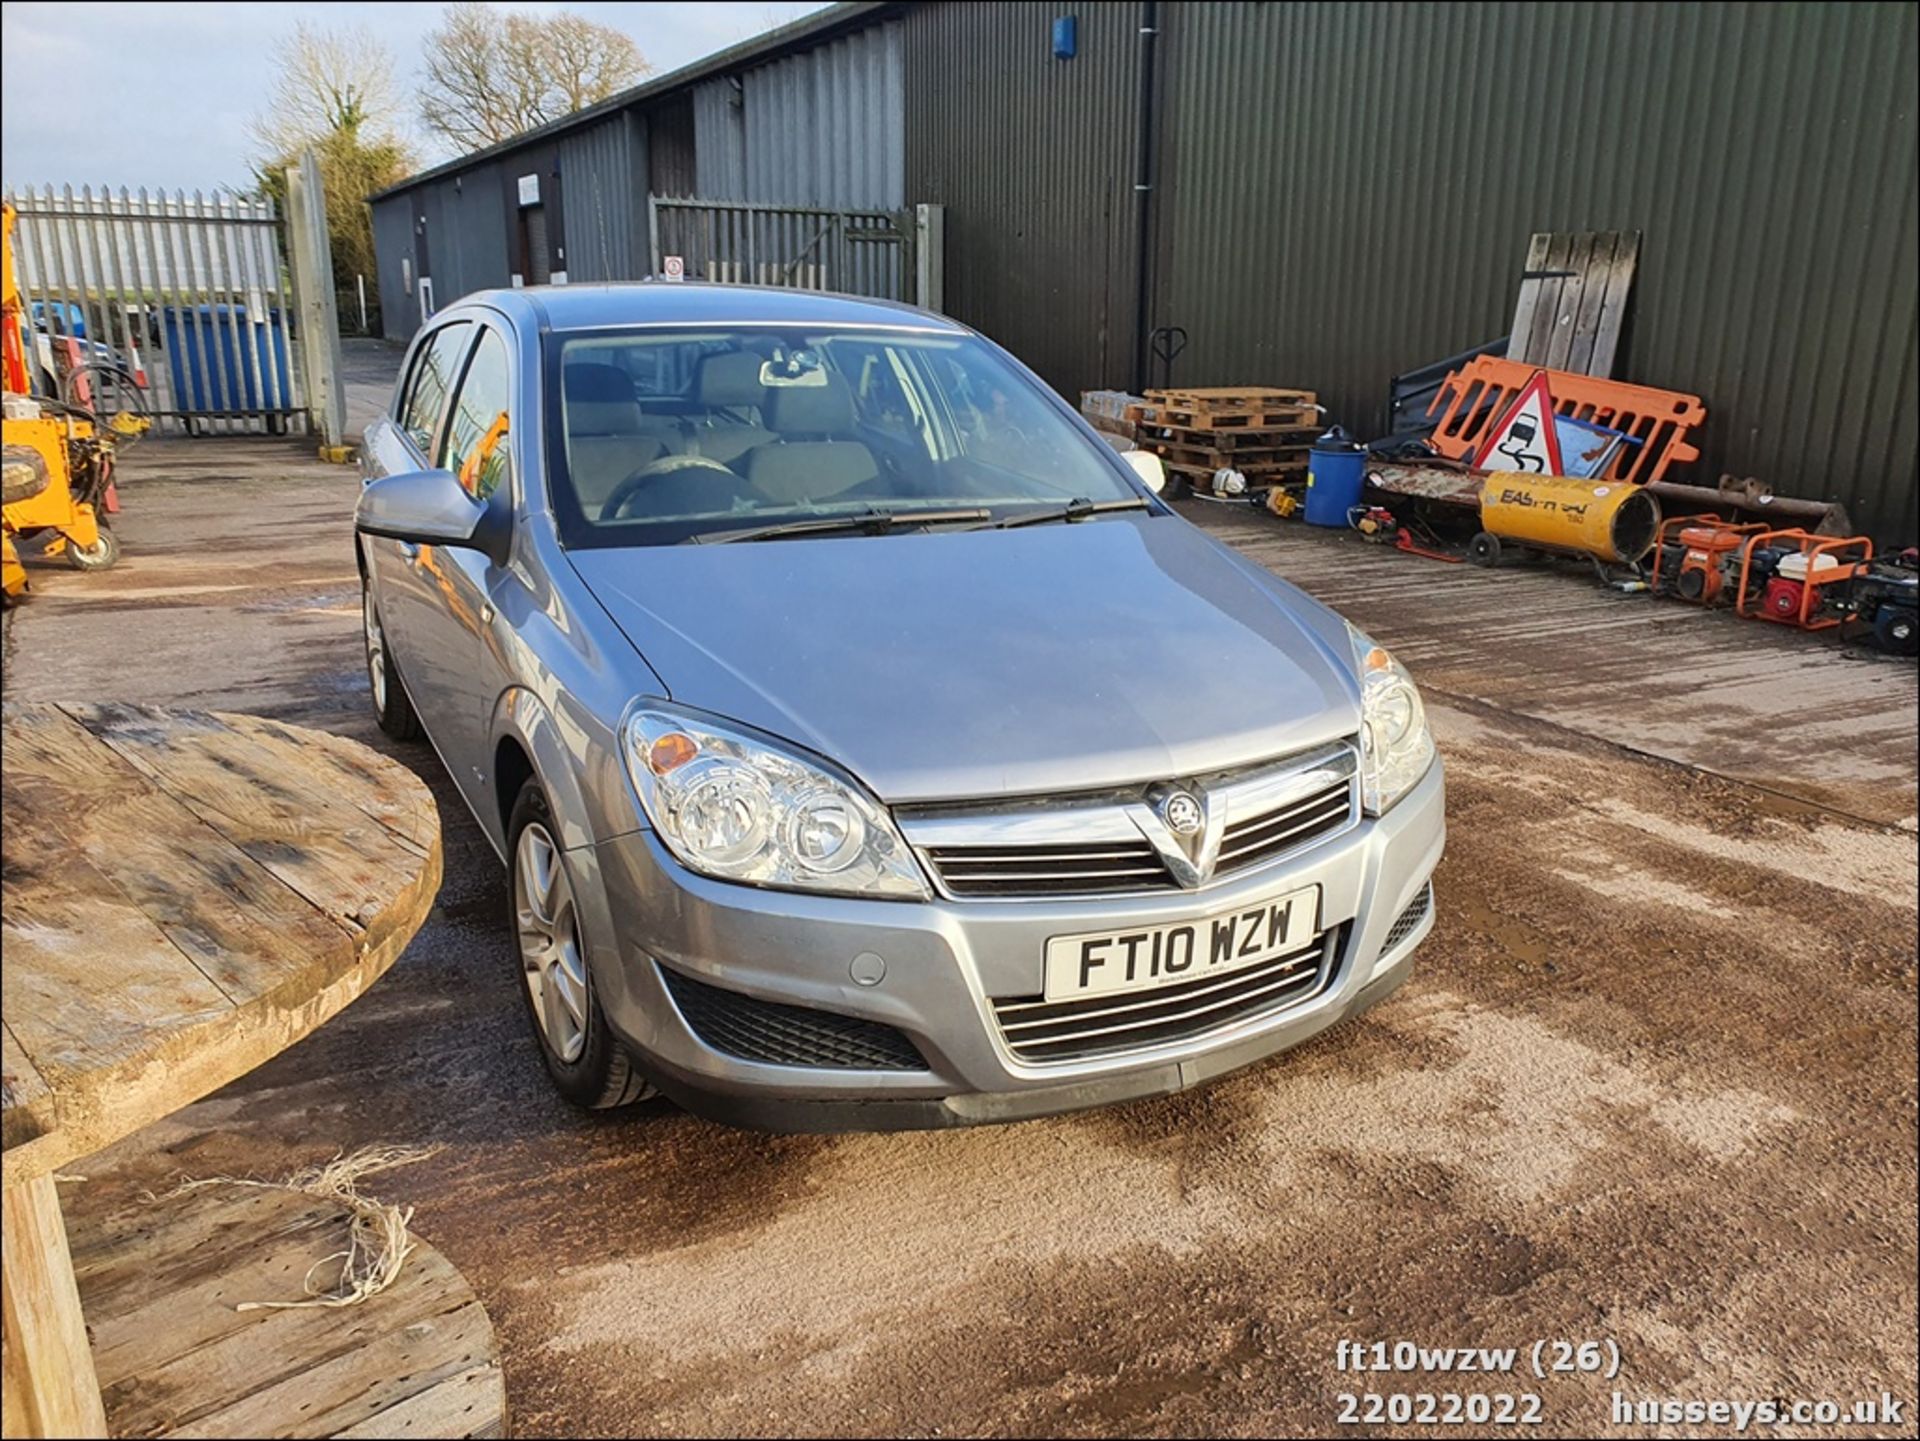 10/10 VAUXHALL ASTRA CLUB - 1364cc 5dr Hatchback (Silver) - Image 27 of 29